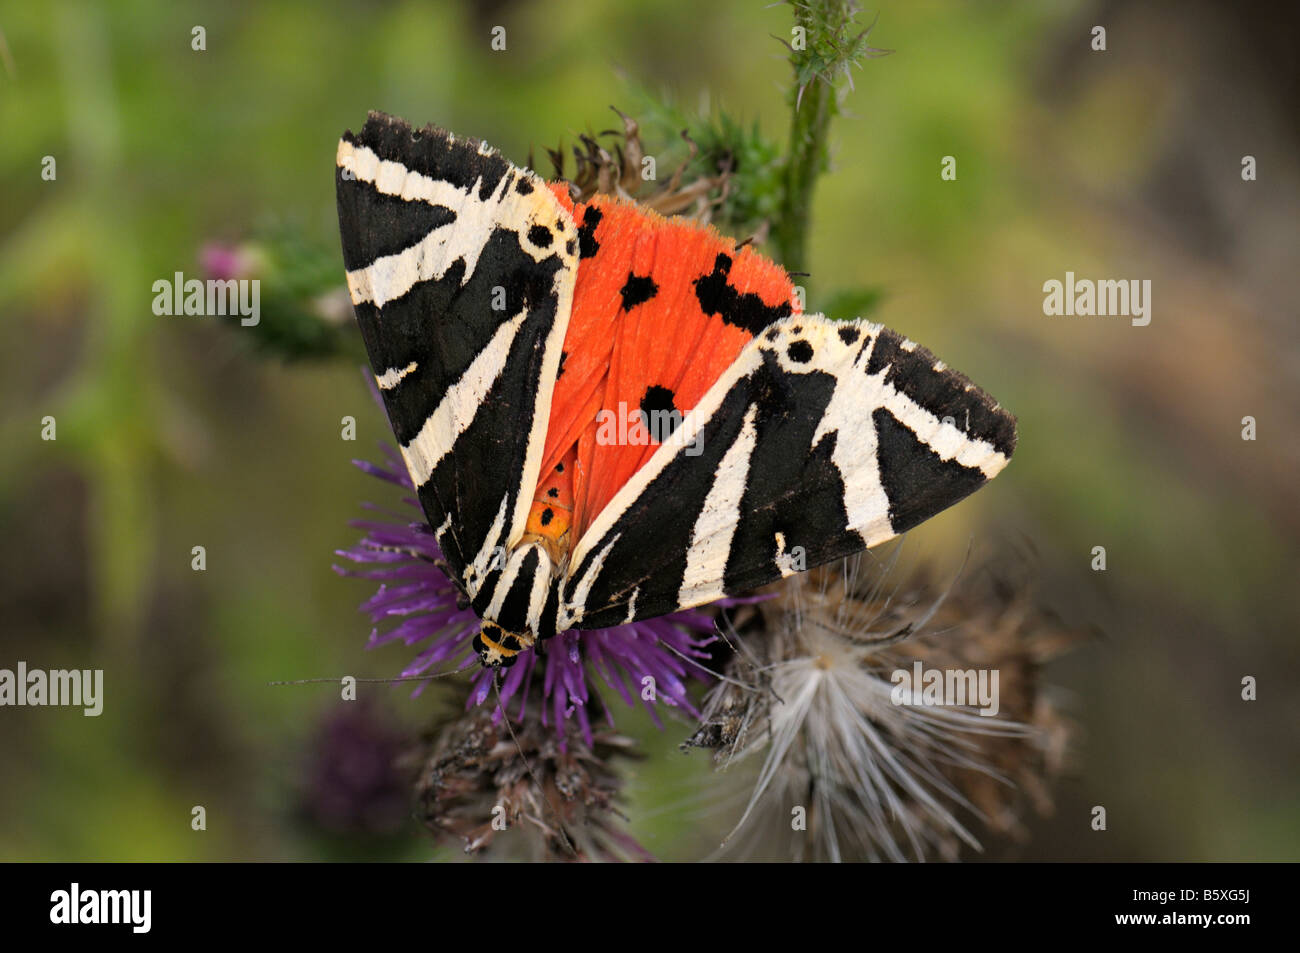 Jersey Tiger Moth, Russian Tiger Moth (Panaxia quadripunctaria) sitting on flowering stand Stock Photo